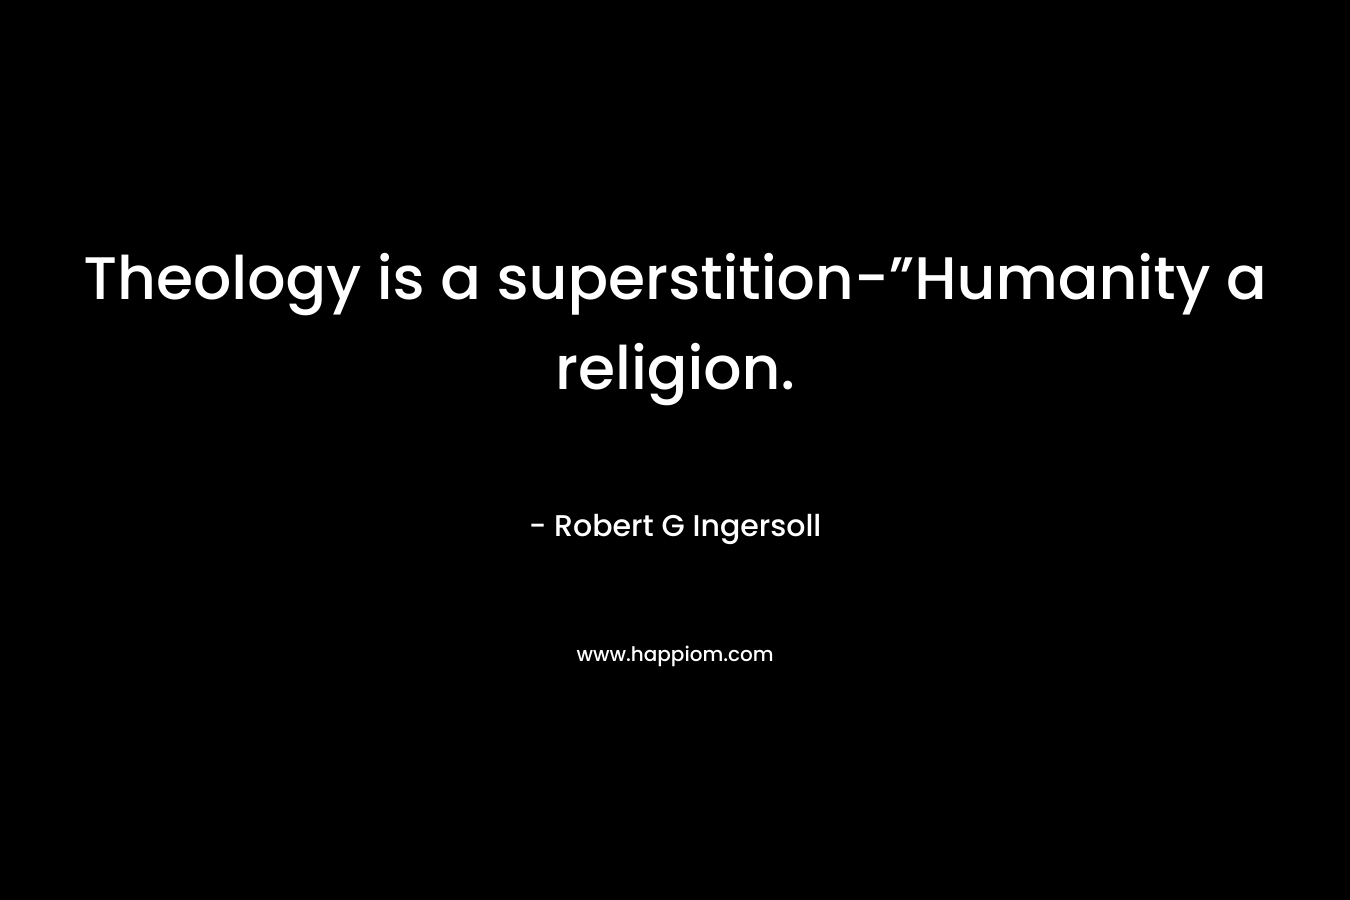 Theology is a superstition-”Humanity a religion.